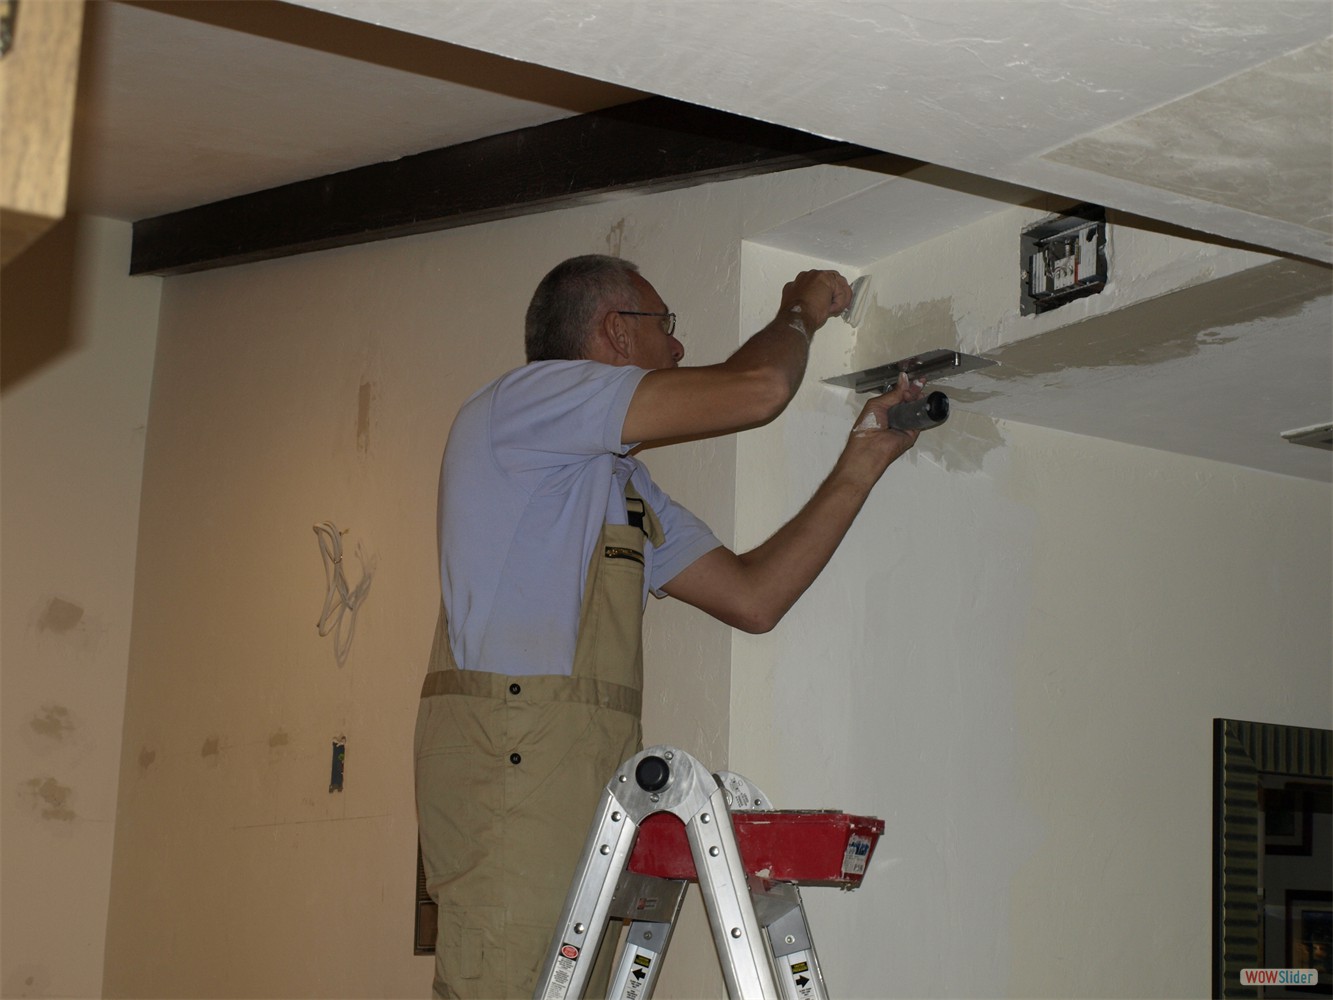 Juergen plastering the enlarged opening to the hall